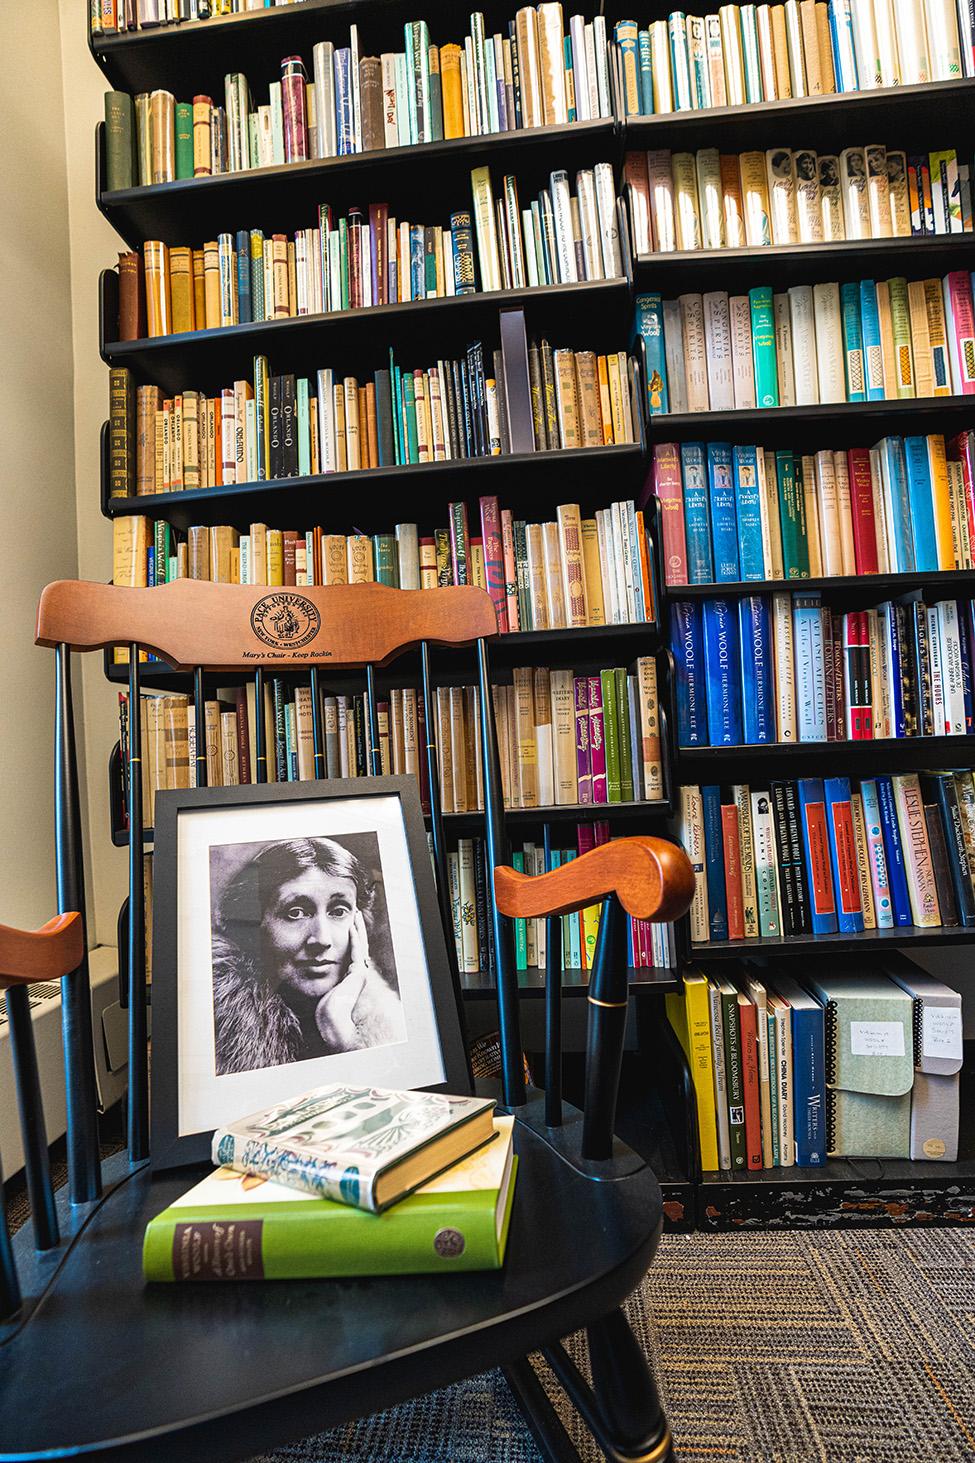 A portrait of Virginia Woolf with some of her books in the Virgina Woolf collection library